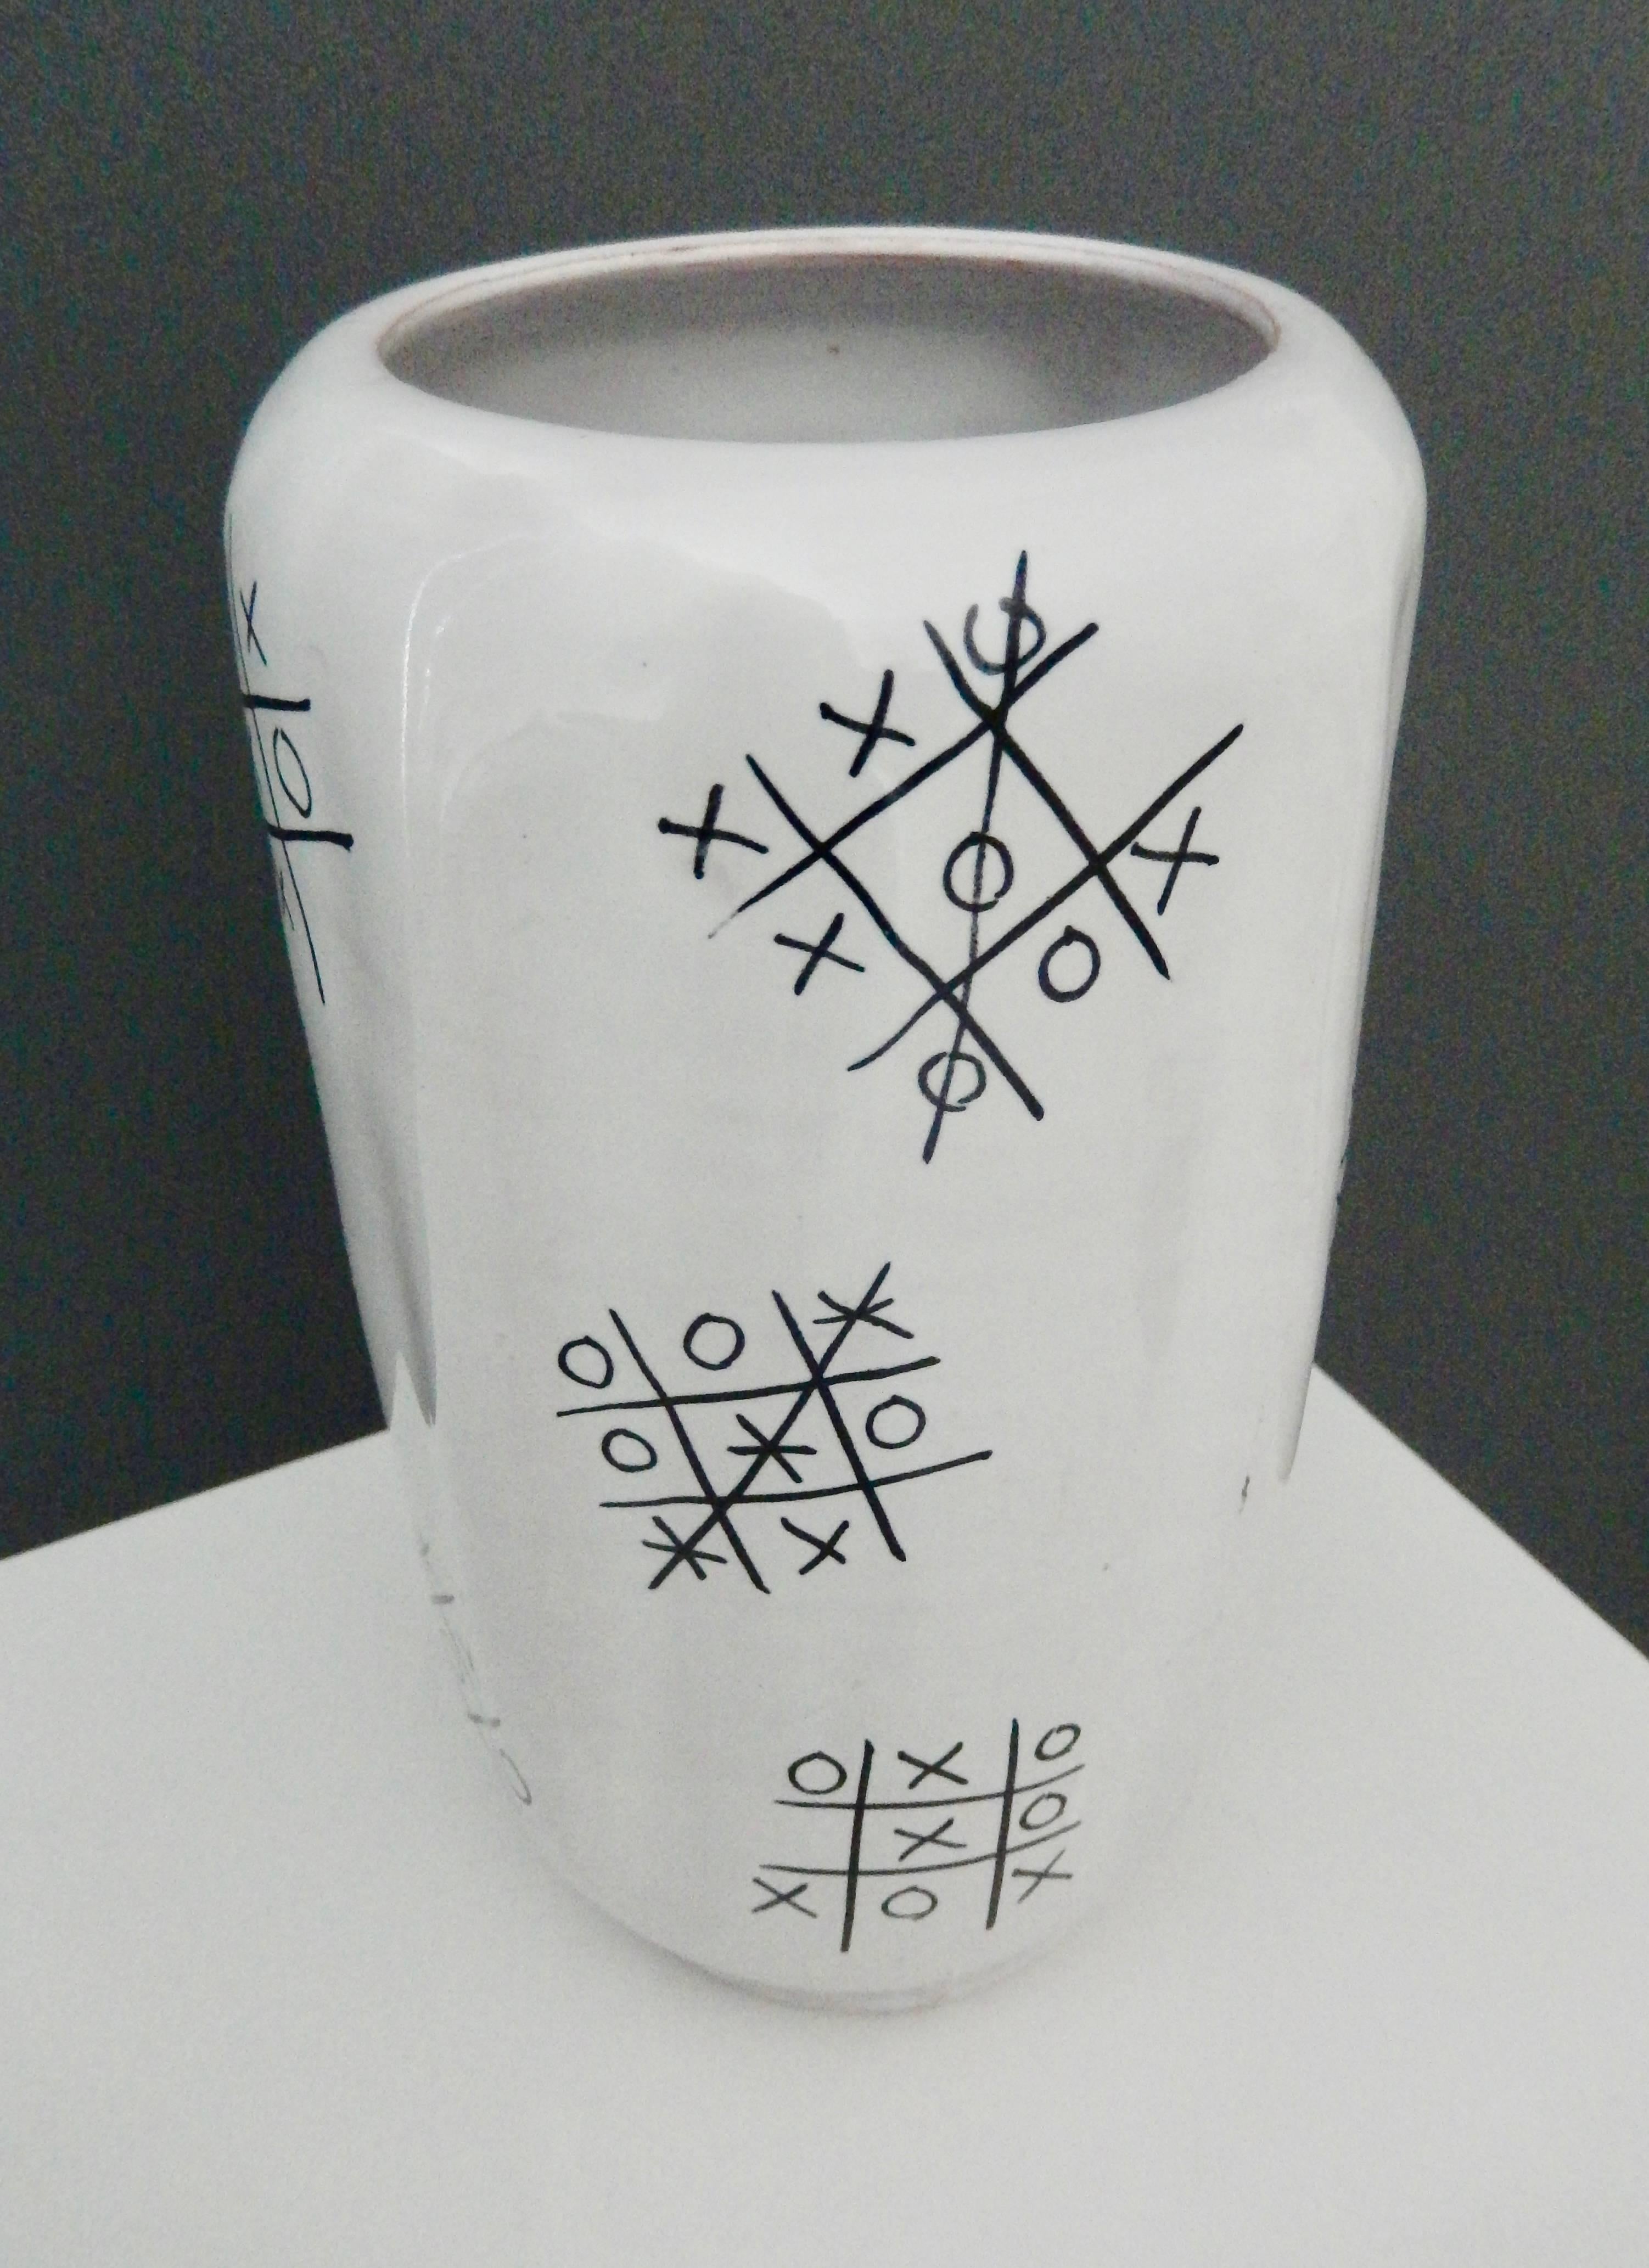 A scarce, faceted vase by Ed Langbein with a original design of several tic-tac-toe games, resembling graffiti. Since games shown are won equally by both players and some a draw, Langbein is depicting a fair game for both players. A wonderful,